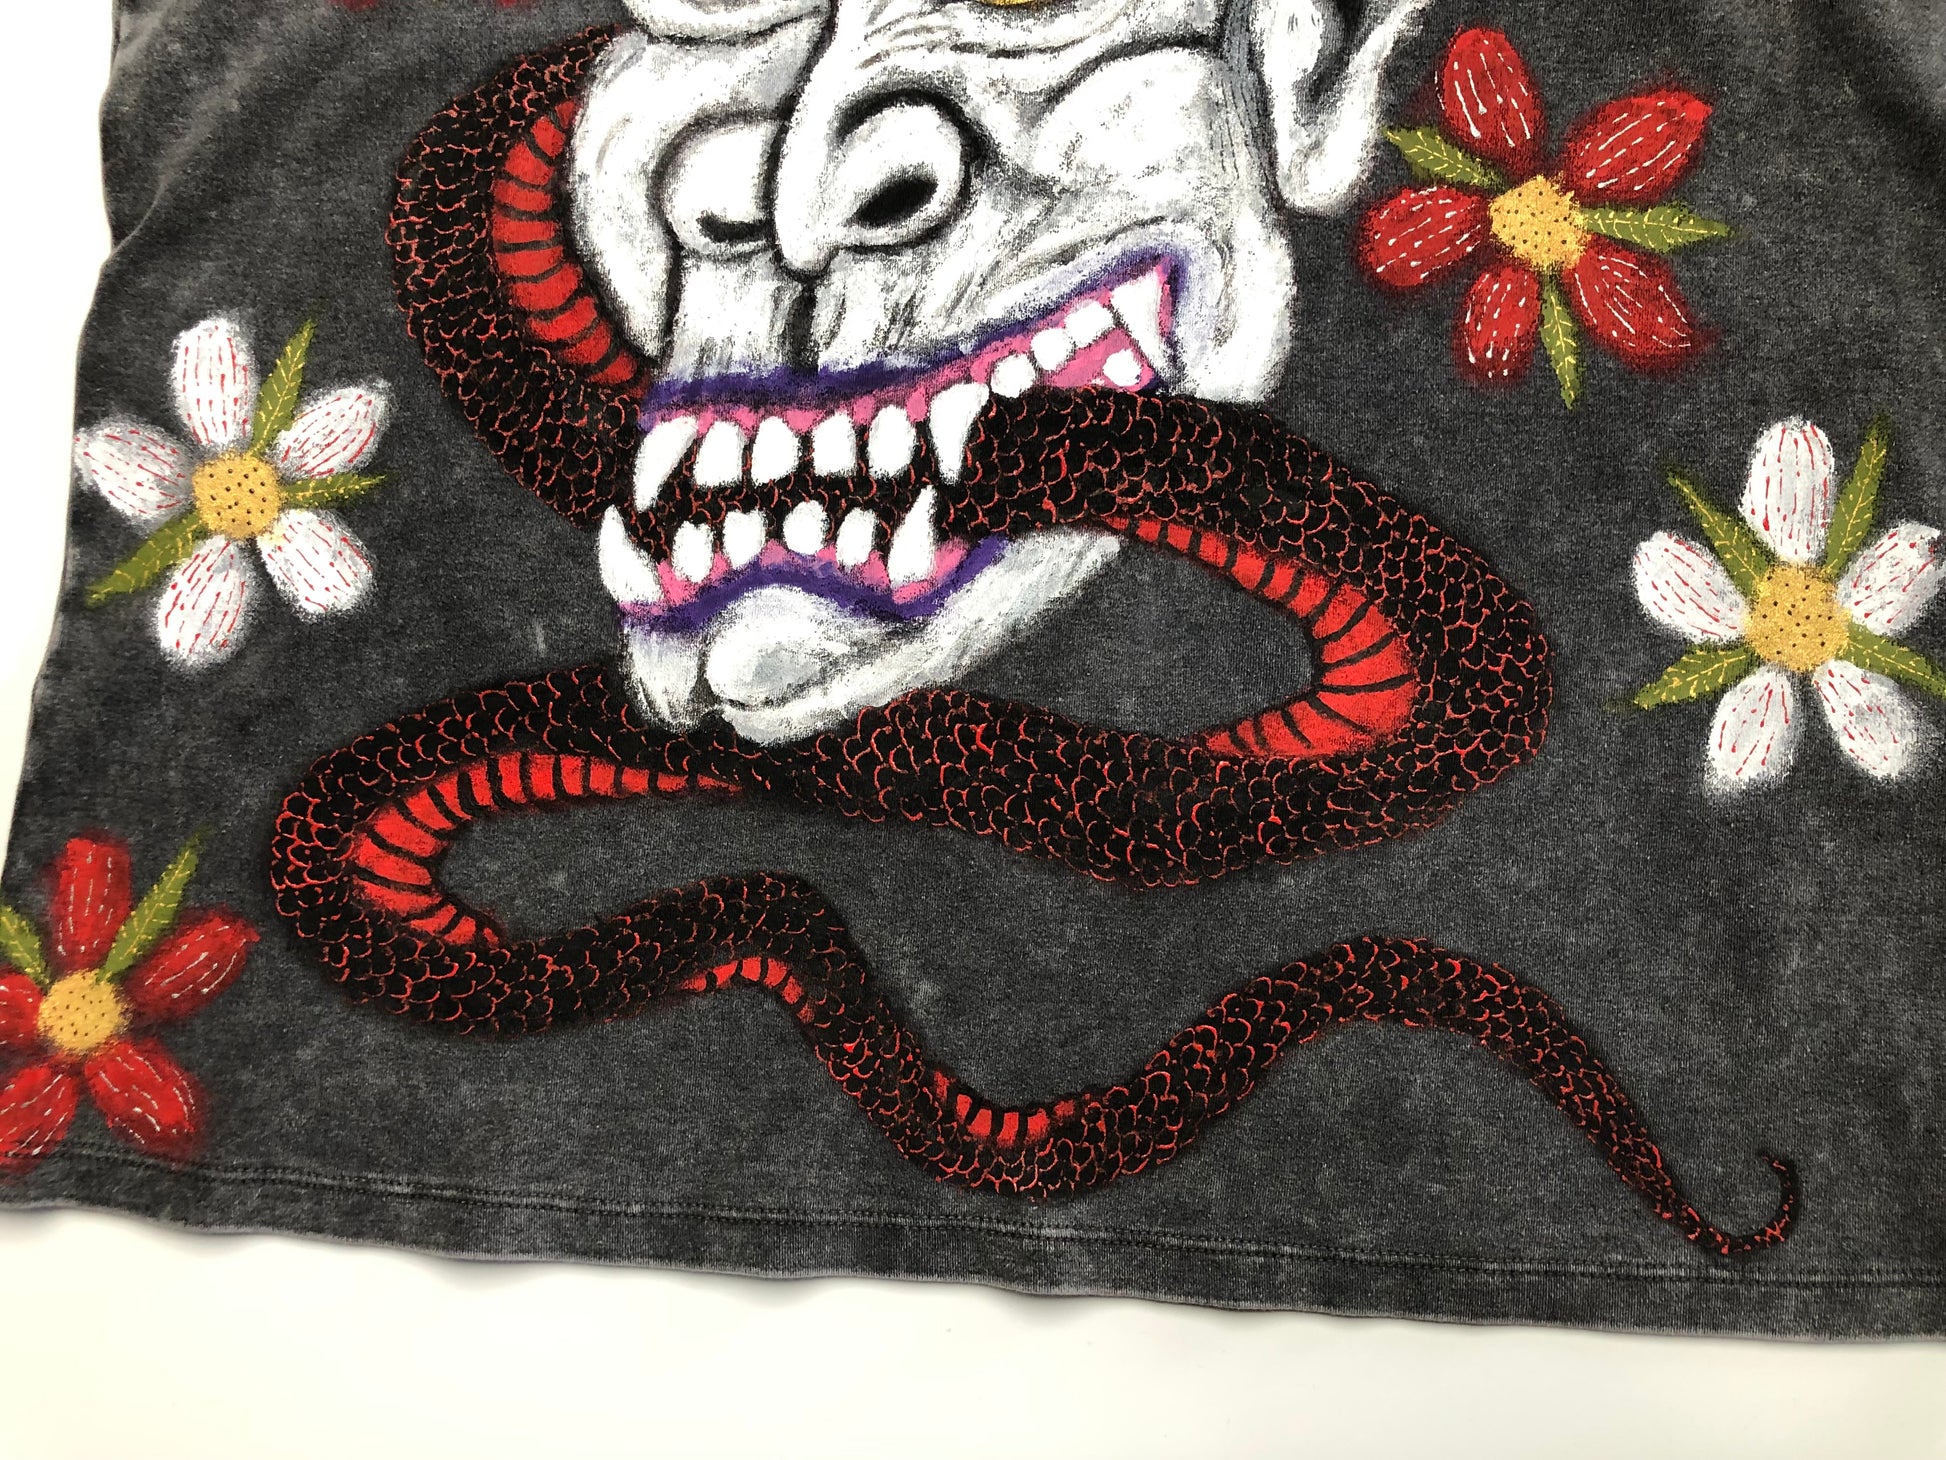 The lower part of the T -shirt with a demon, snake and floral design